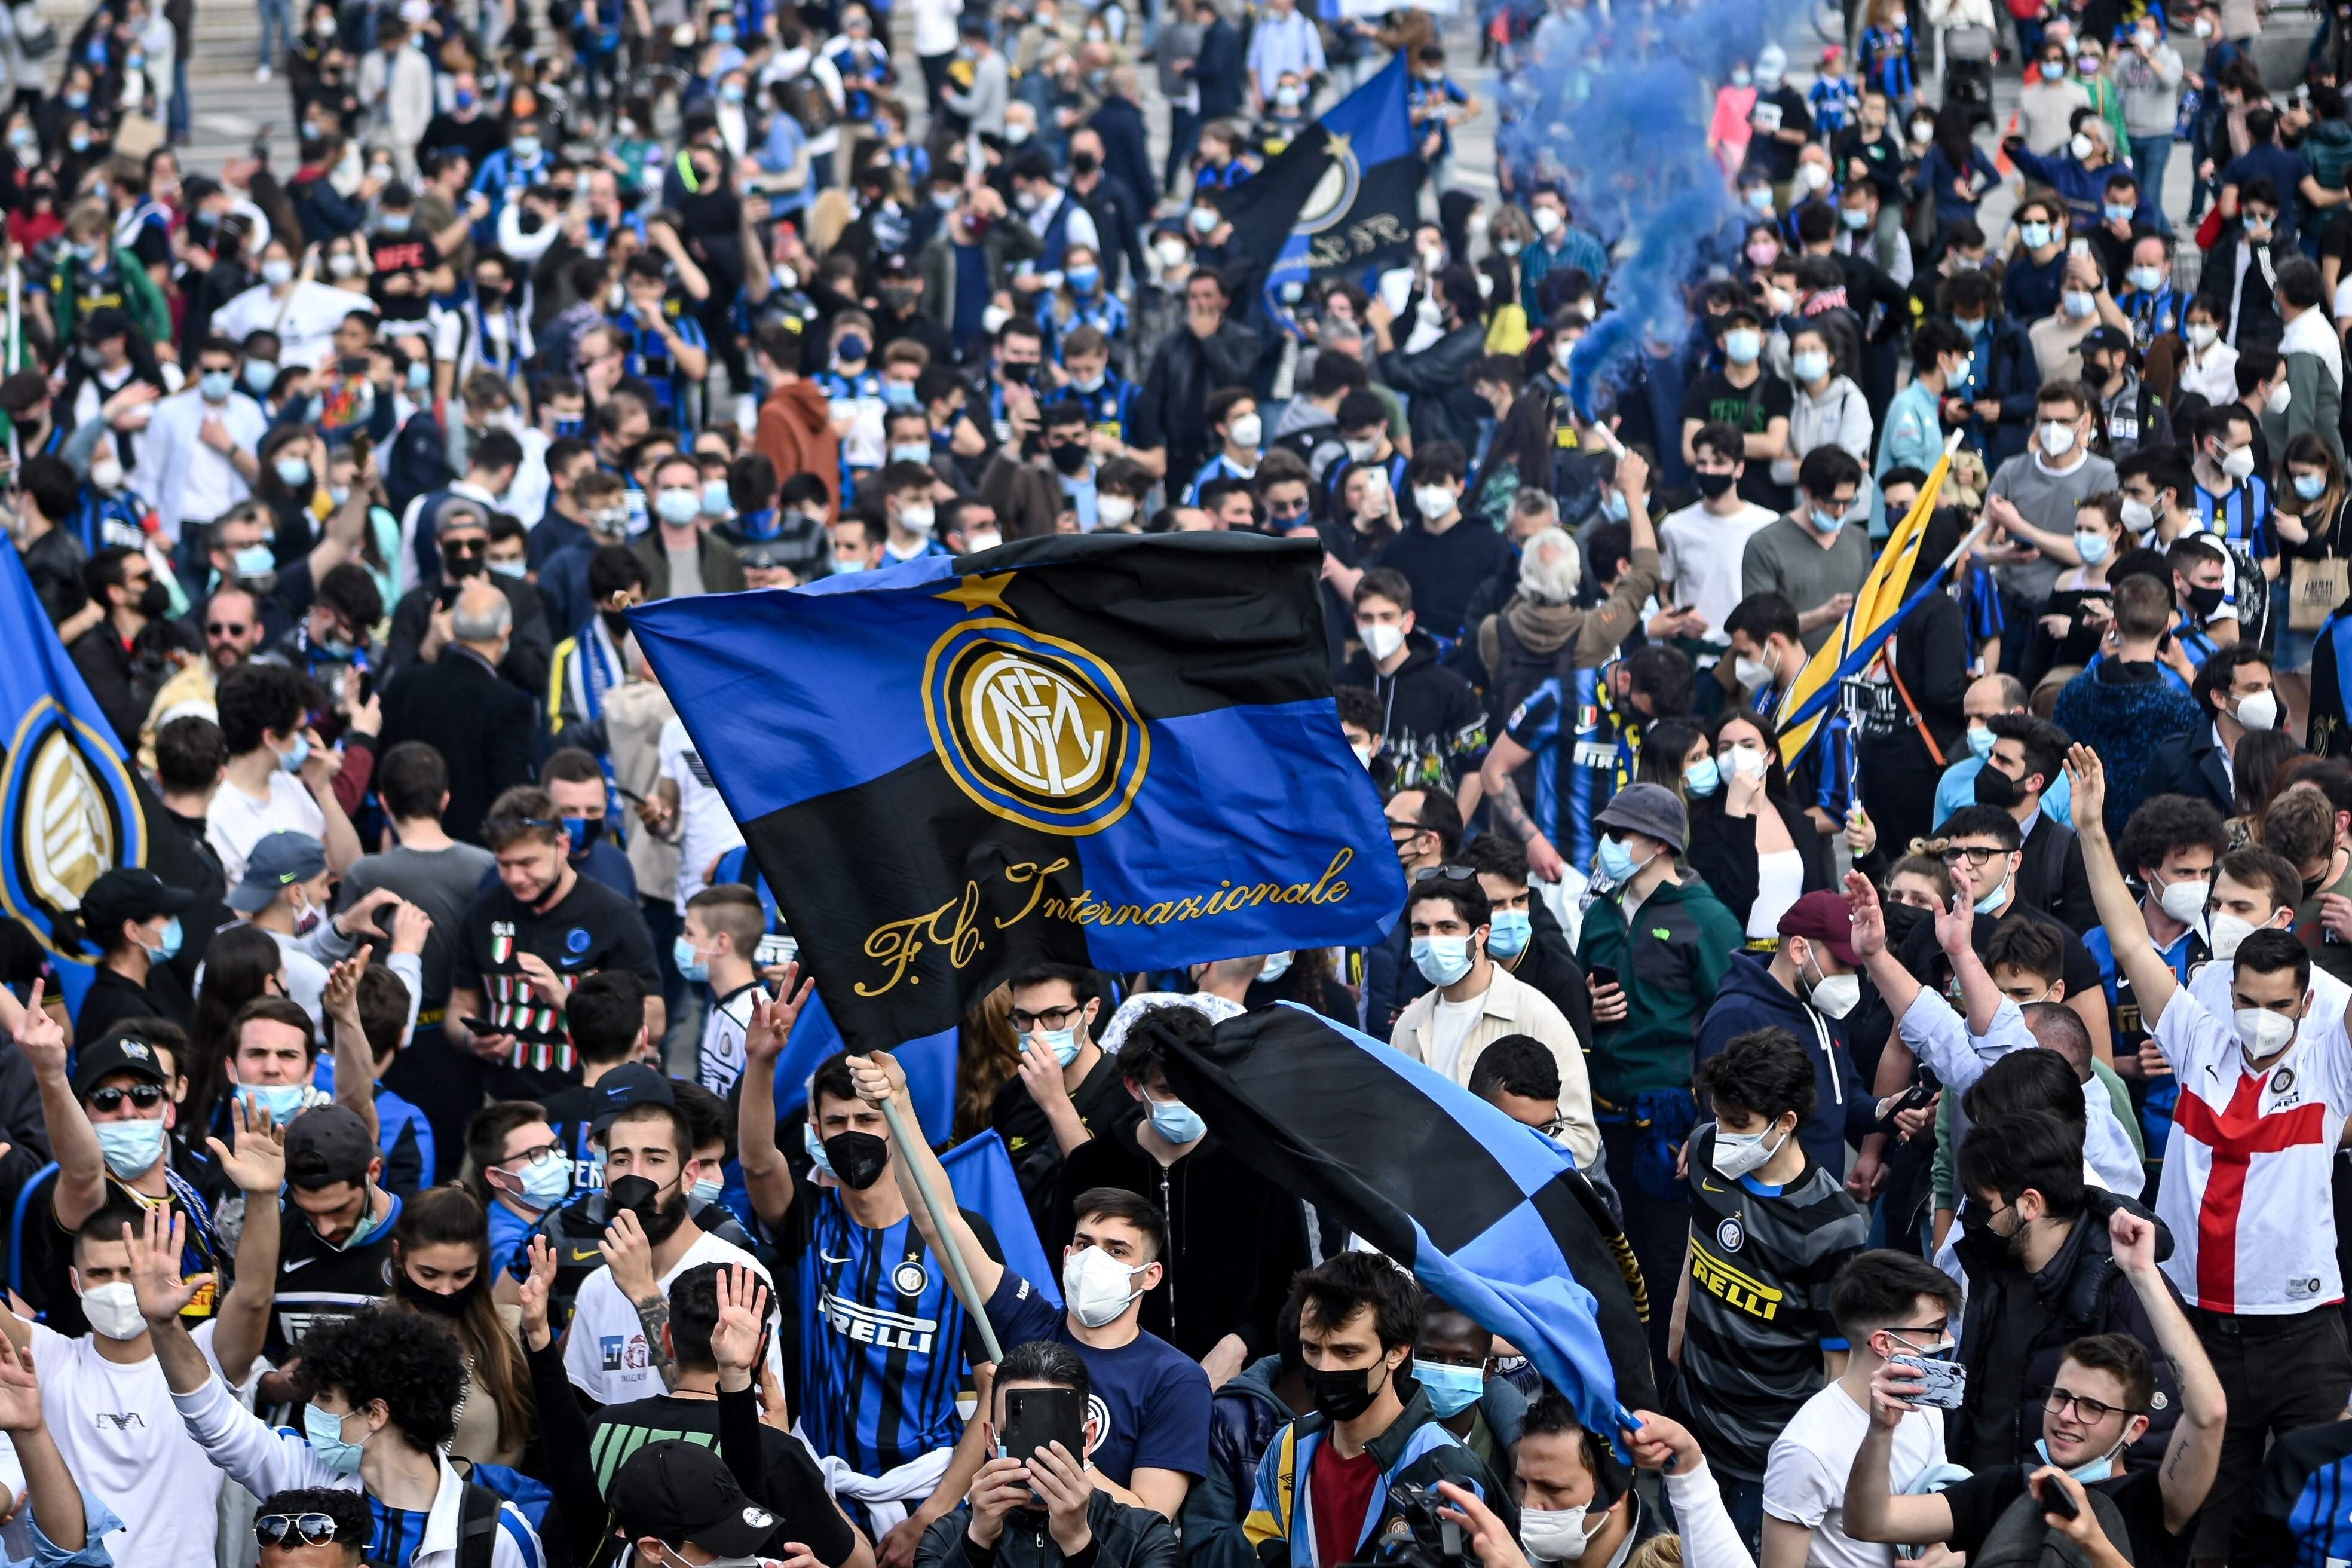 Inter Milan supporters celebrate the club’s Serie A title win at Piazza Duomo in Milan. Photo: AFP